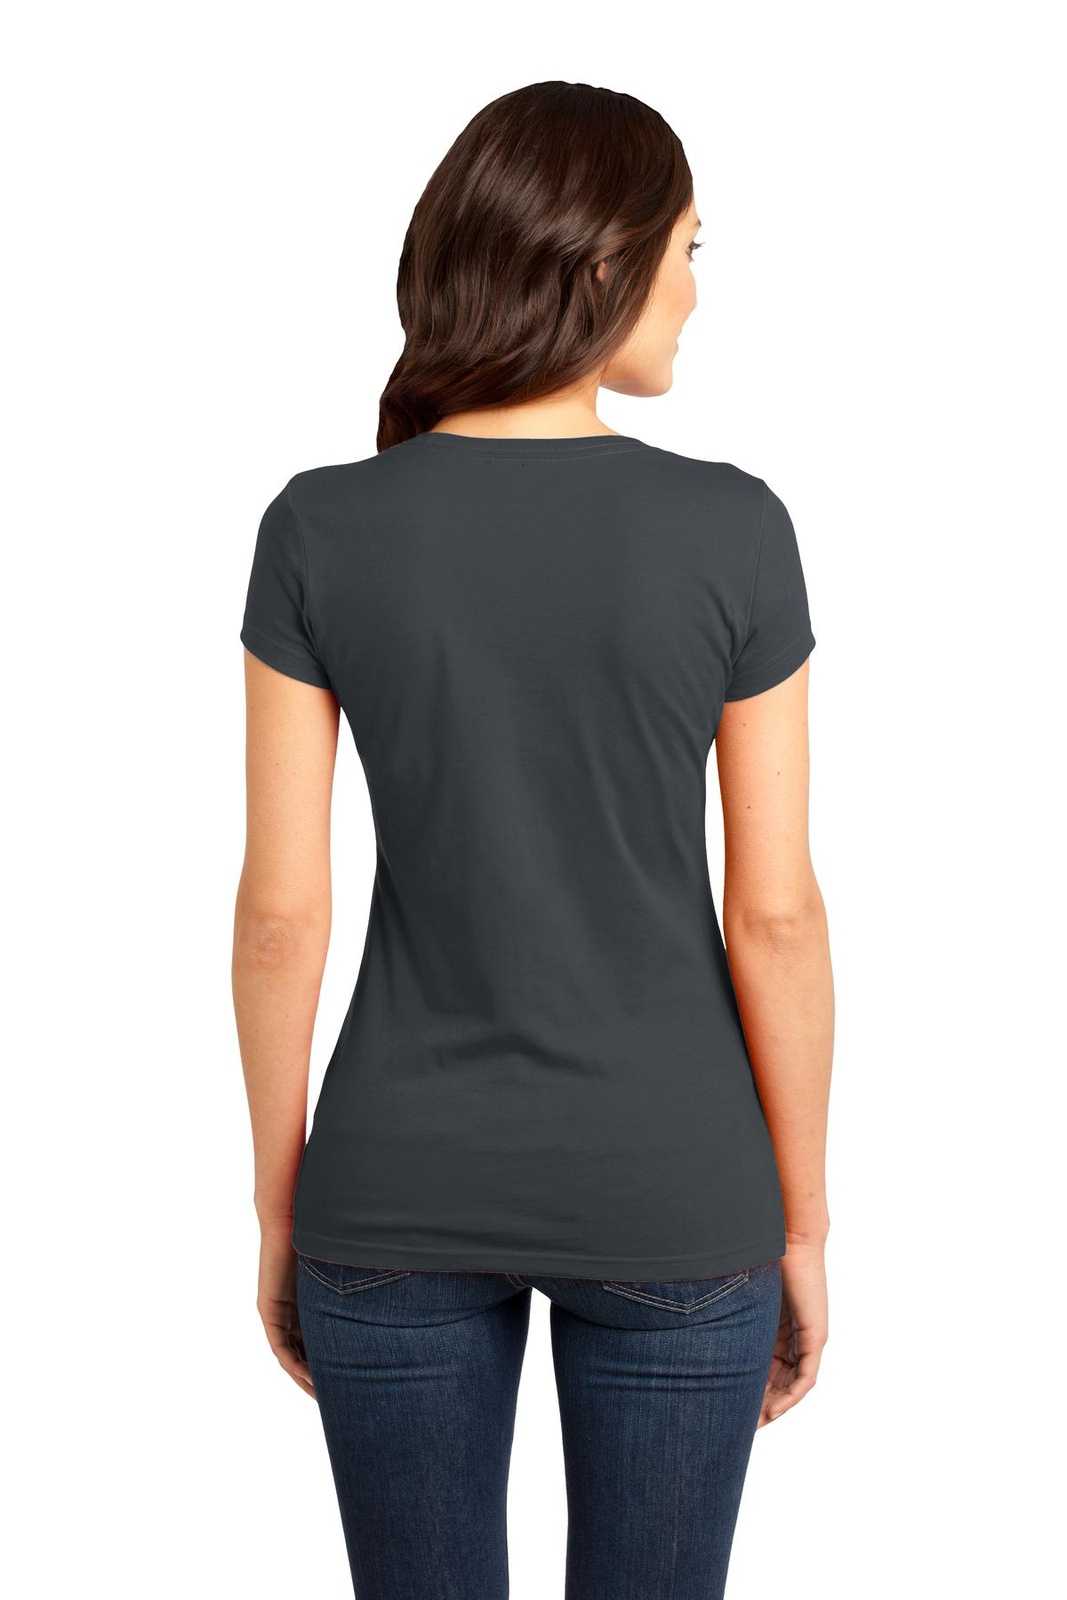 District DT6001 Women's Fitted Very Important Tee - Charcoal - HIT a Double - 1